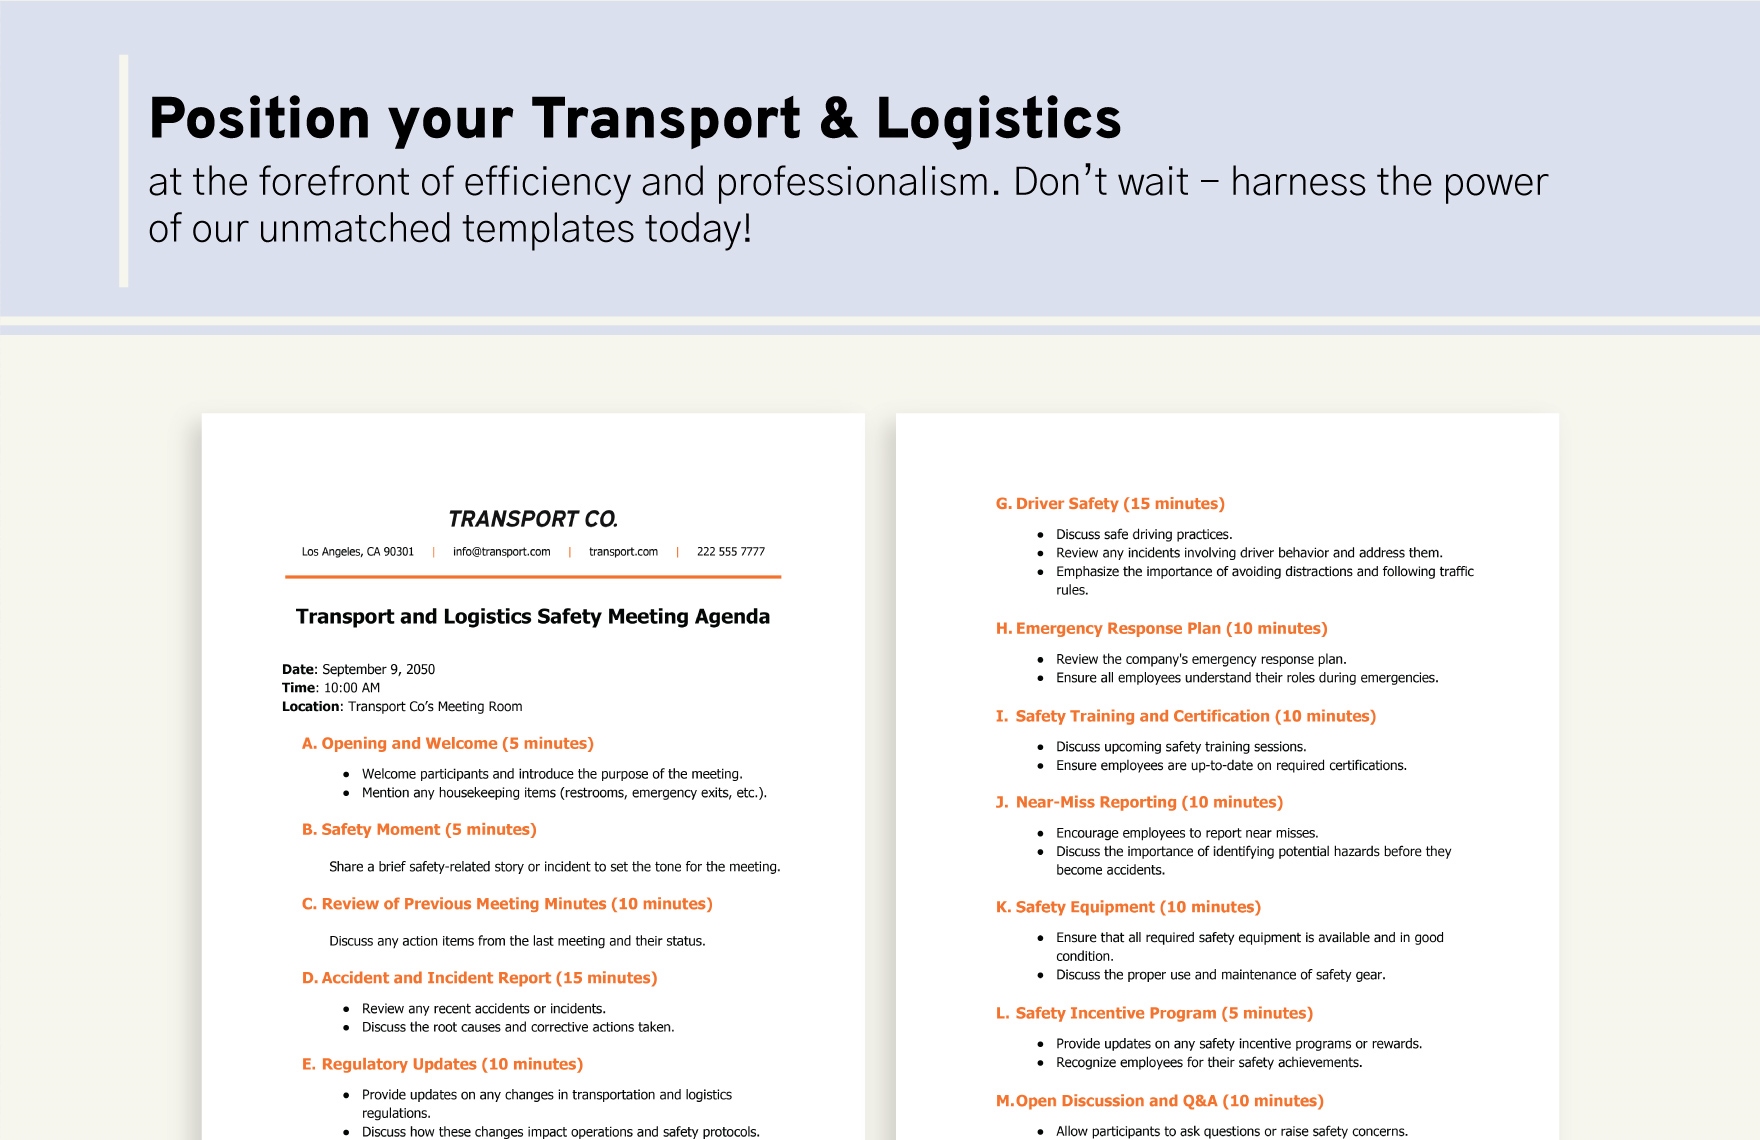 Transport and Logistics Safety Meeting Agenda Template